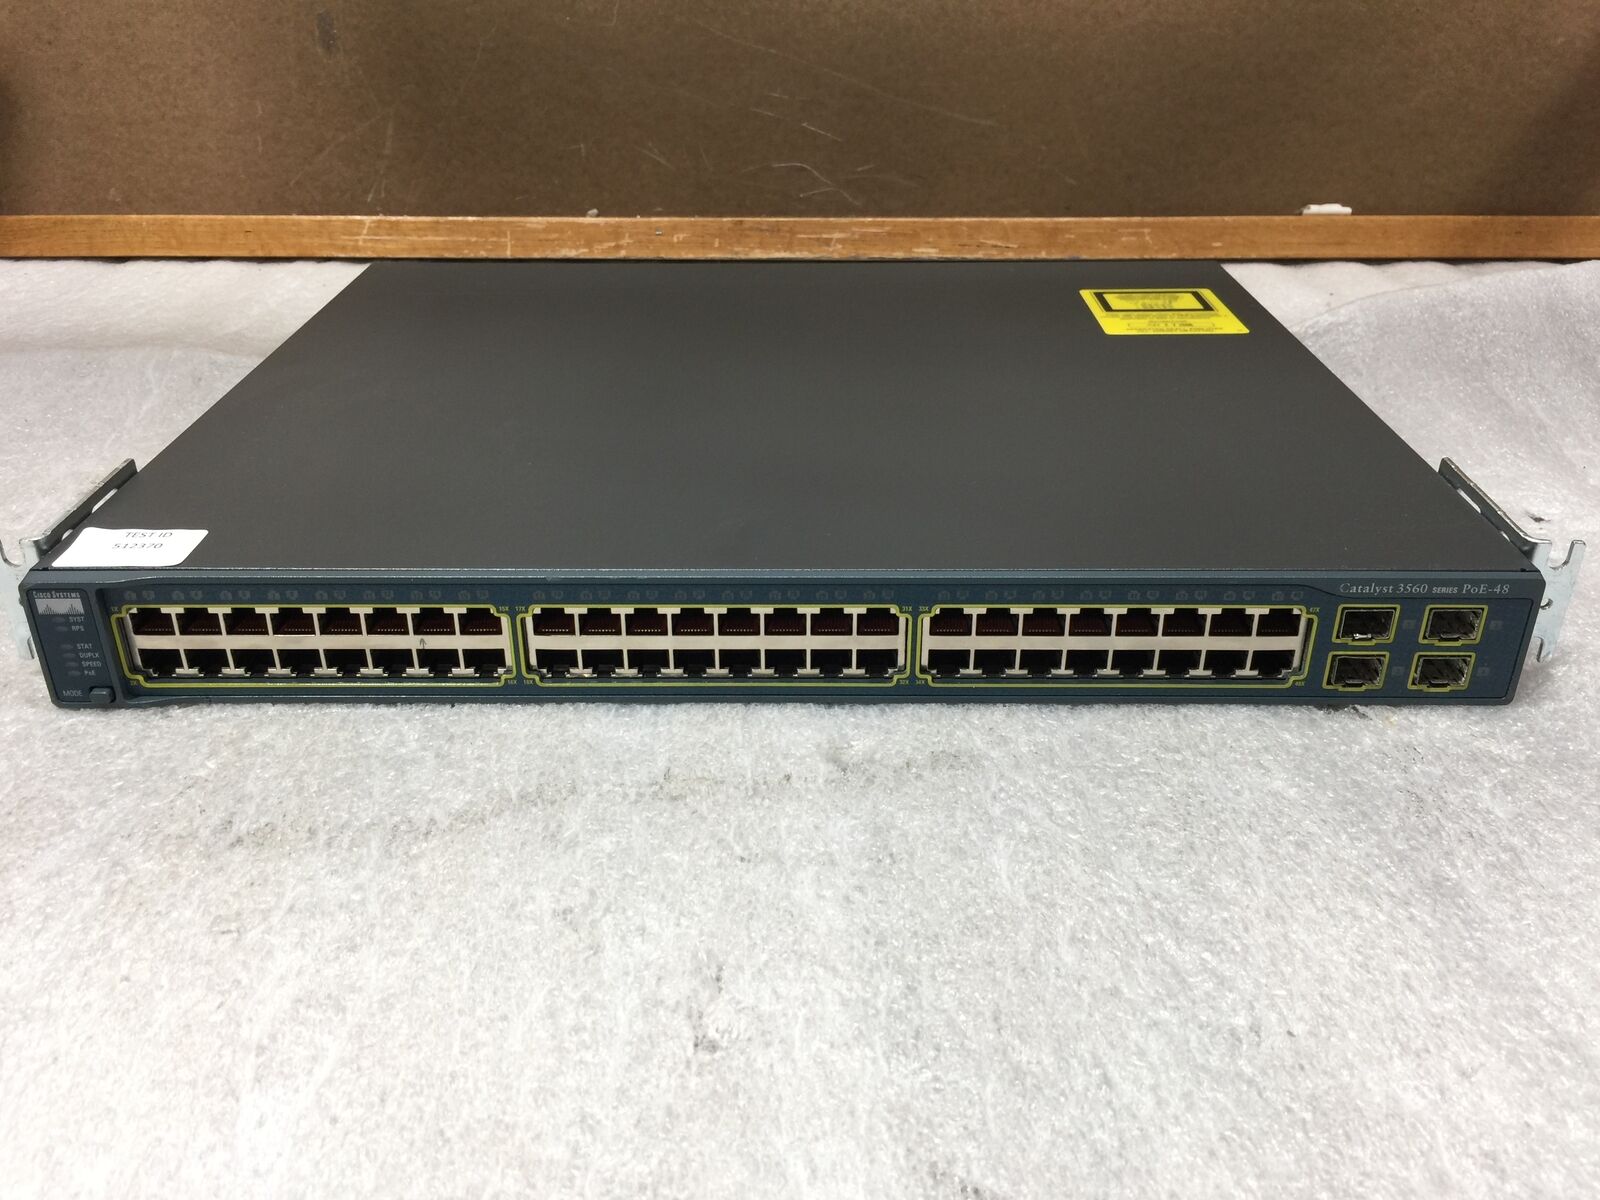 Cisco Catalyst 3560 Series WS-C3560-48PS-S PoE 48-Port Network Switch, Tested